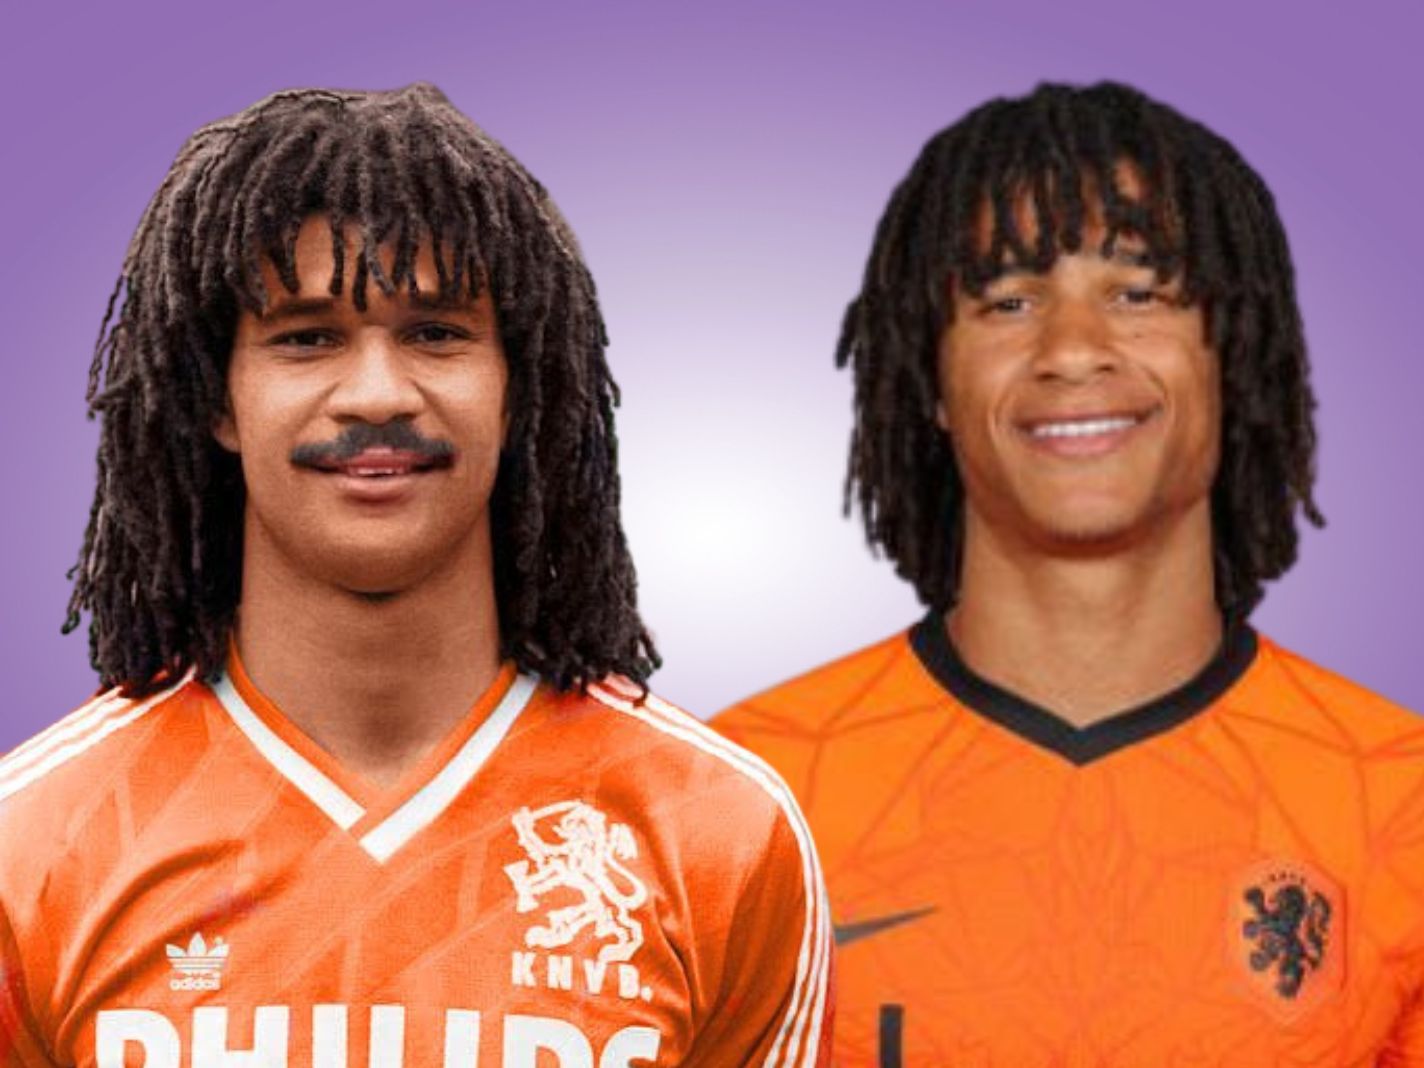 Are Nathan Ake and Ruud Gullit Really Related?